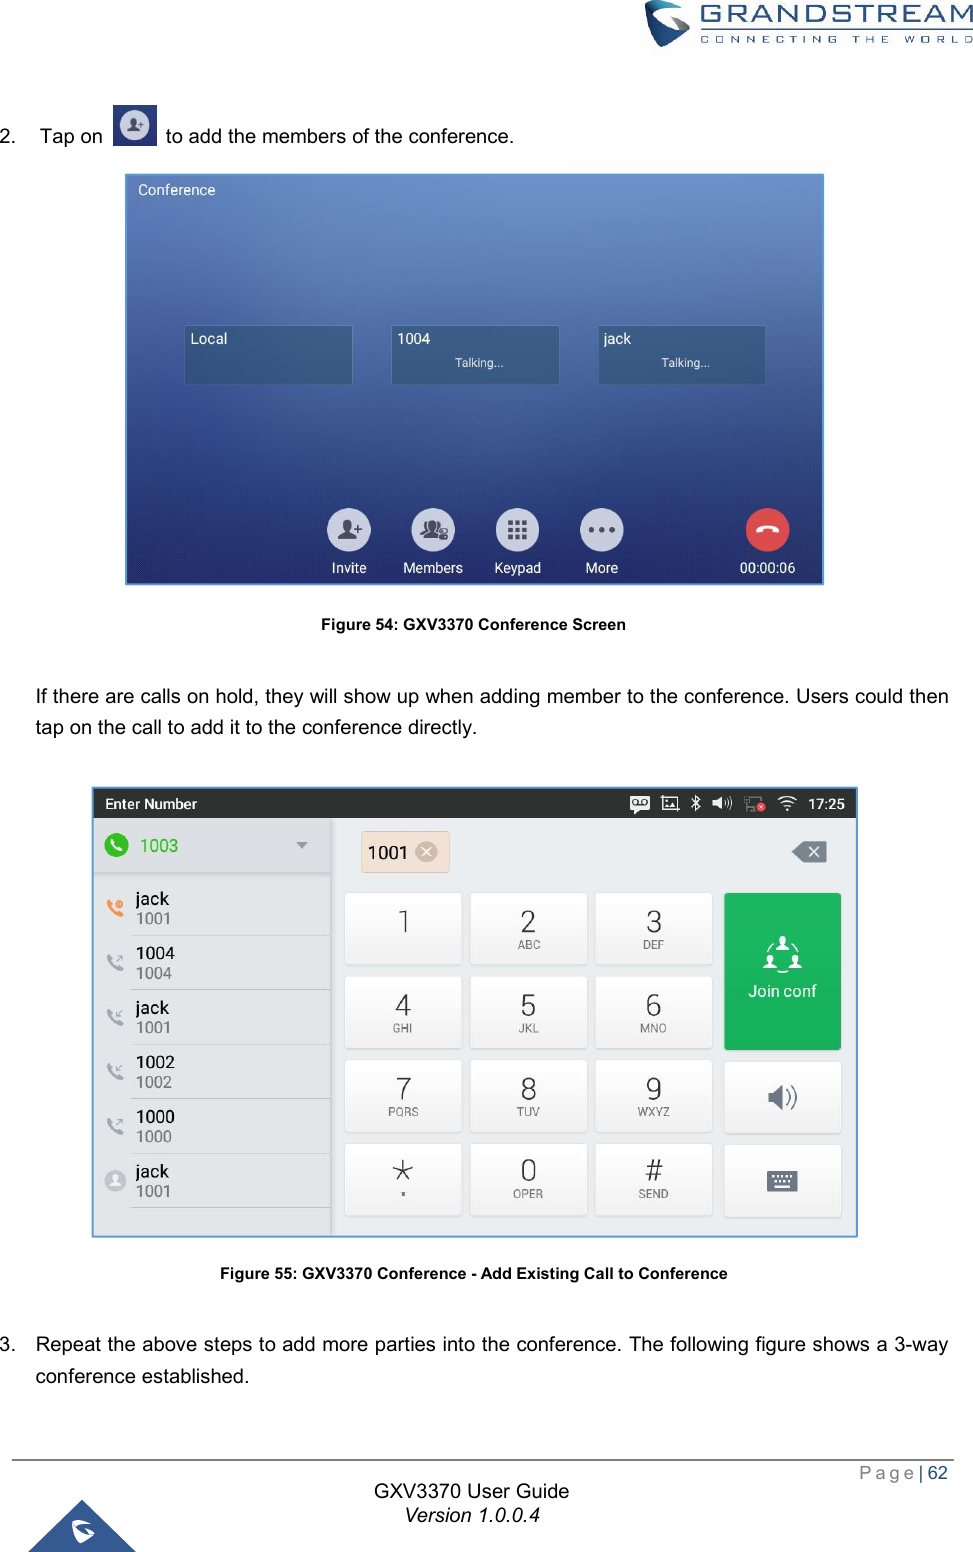  Page| 62  GXV3370 User Guide Version 1.0.0.4  2. Tap on   to add the members of the conference.  Figure 54: GXV3370 Conference Screen  If there are calls on hold, they will show up when adding member to the conference. Users could then tap on the call to add it to the conference directly.   Figure 55: GXV3370 Conference - Add Existing Call to Conference  3. Repeat the above steps to add more parties into the conference. The following figure shows a 3-way conference established. 